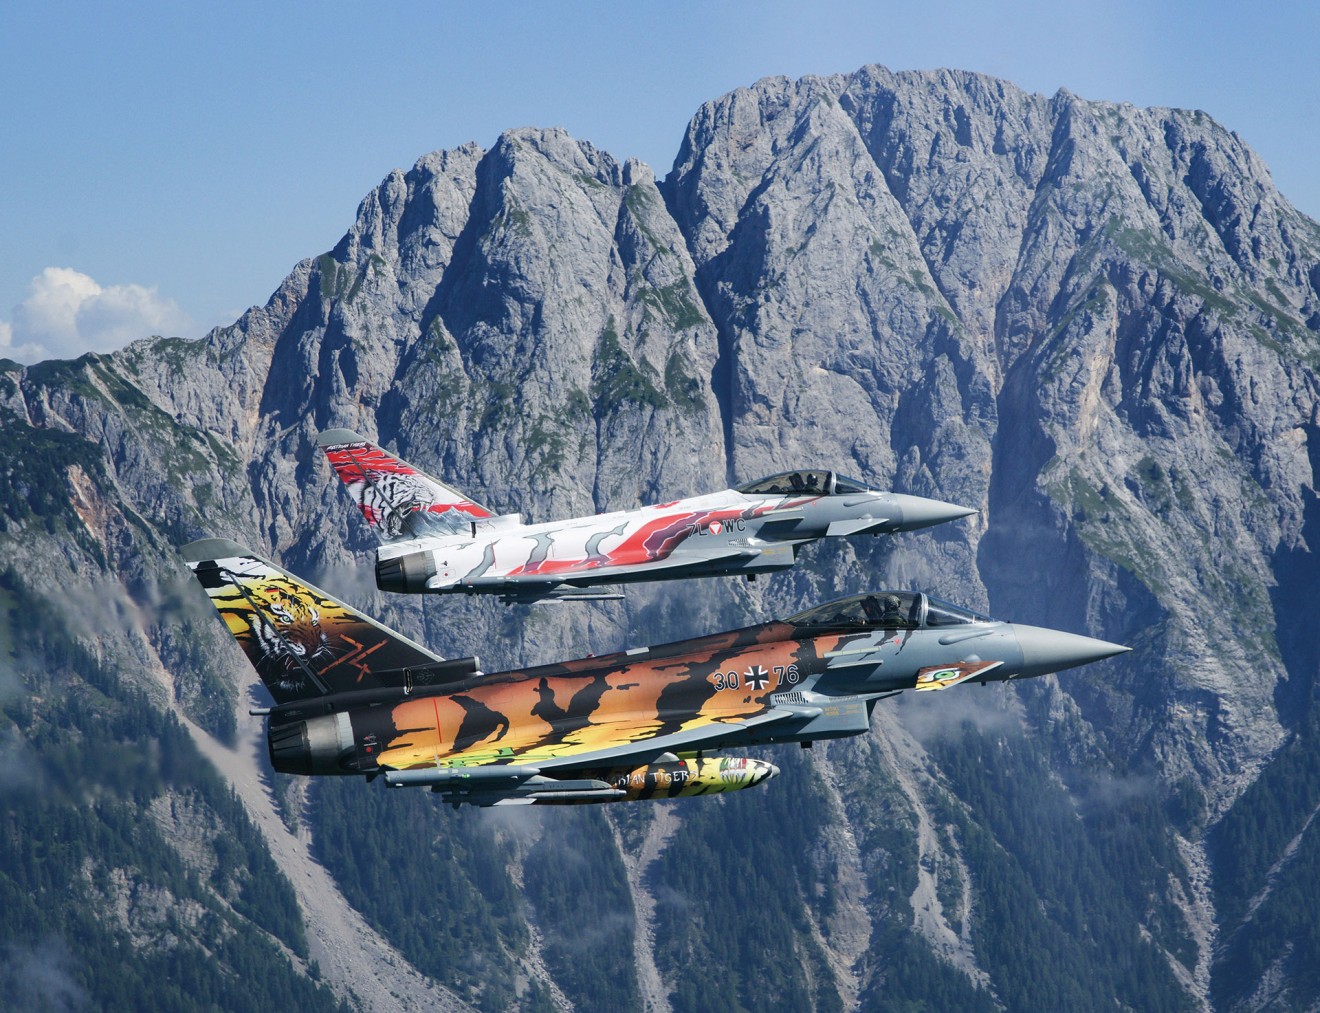 A “Bavarian Tiger” from 74 Tactical Air  Wing, Neuburg/Donau  together with the  “Austrian Tiger” from  Zeltweg over the Alps